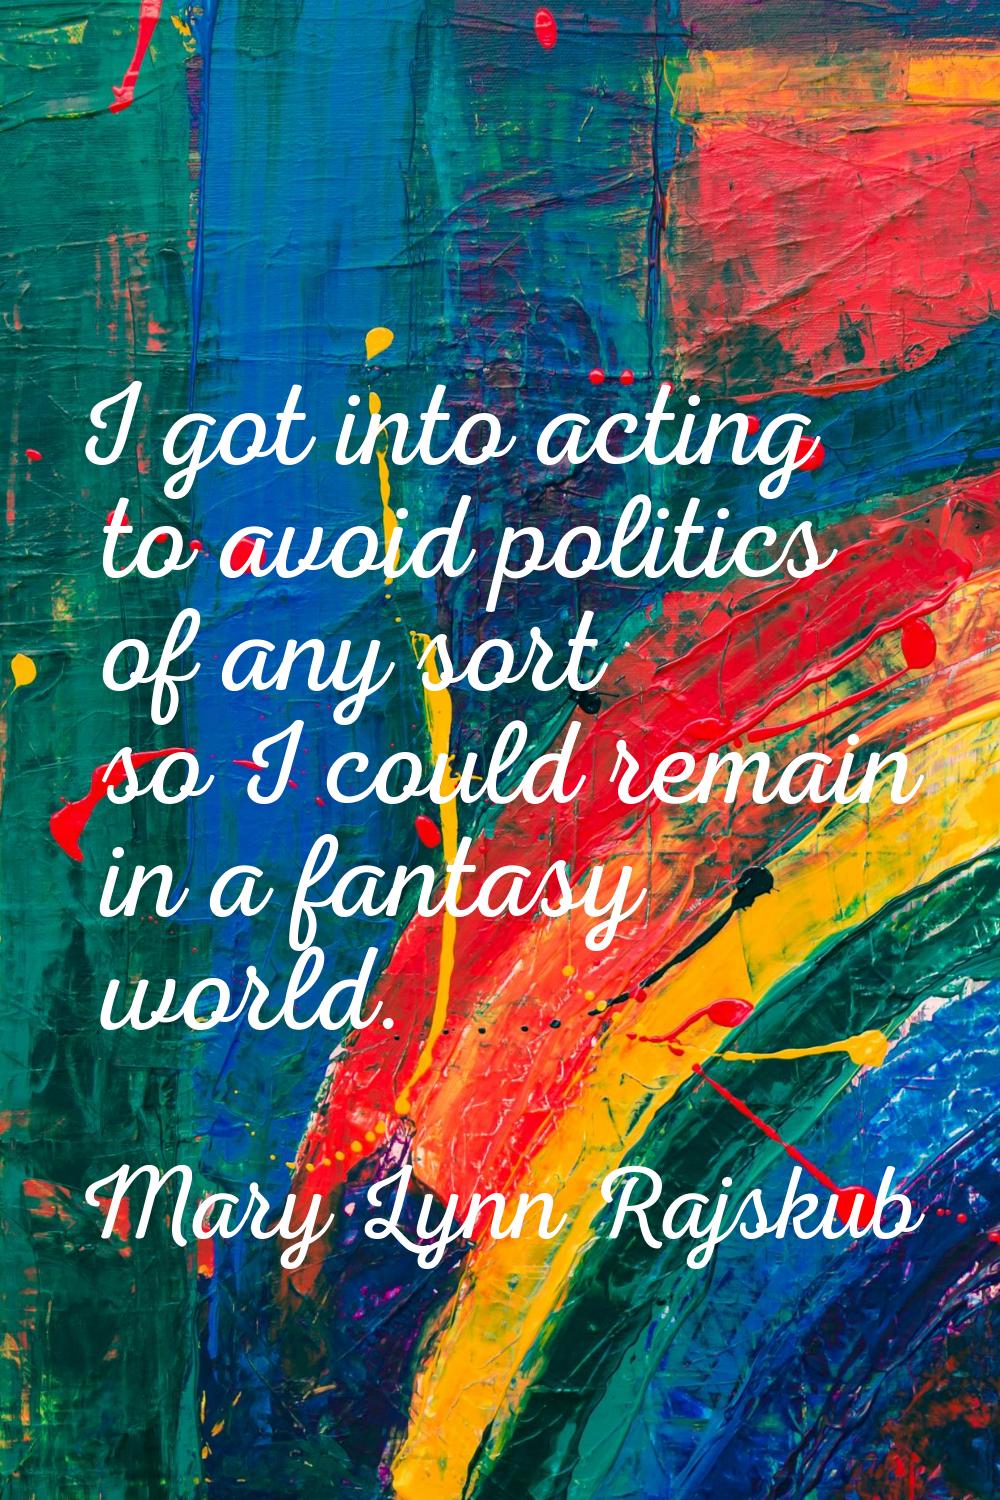 I got into acting to avoid politics of any sort so I could remain in a fantasy world.